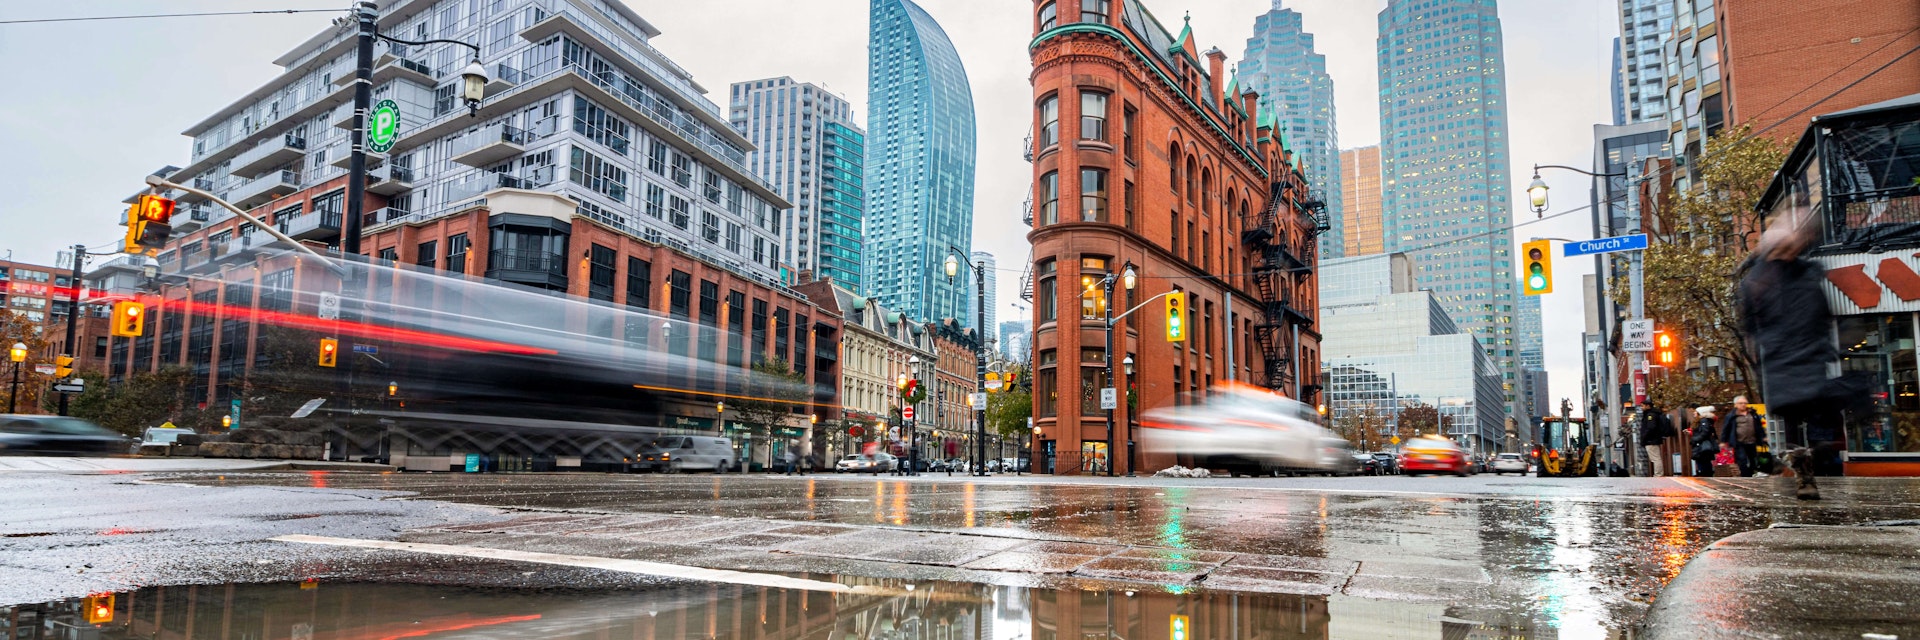 The Gooderham Building (Flatiron), a Romanesque style building, in East Toronto on a rainy day in the Financial District.